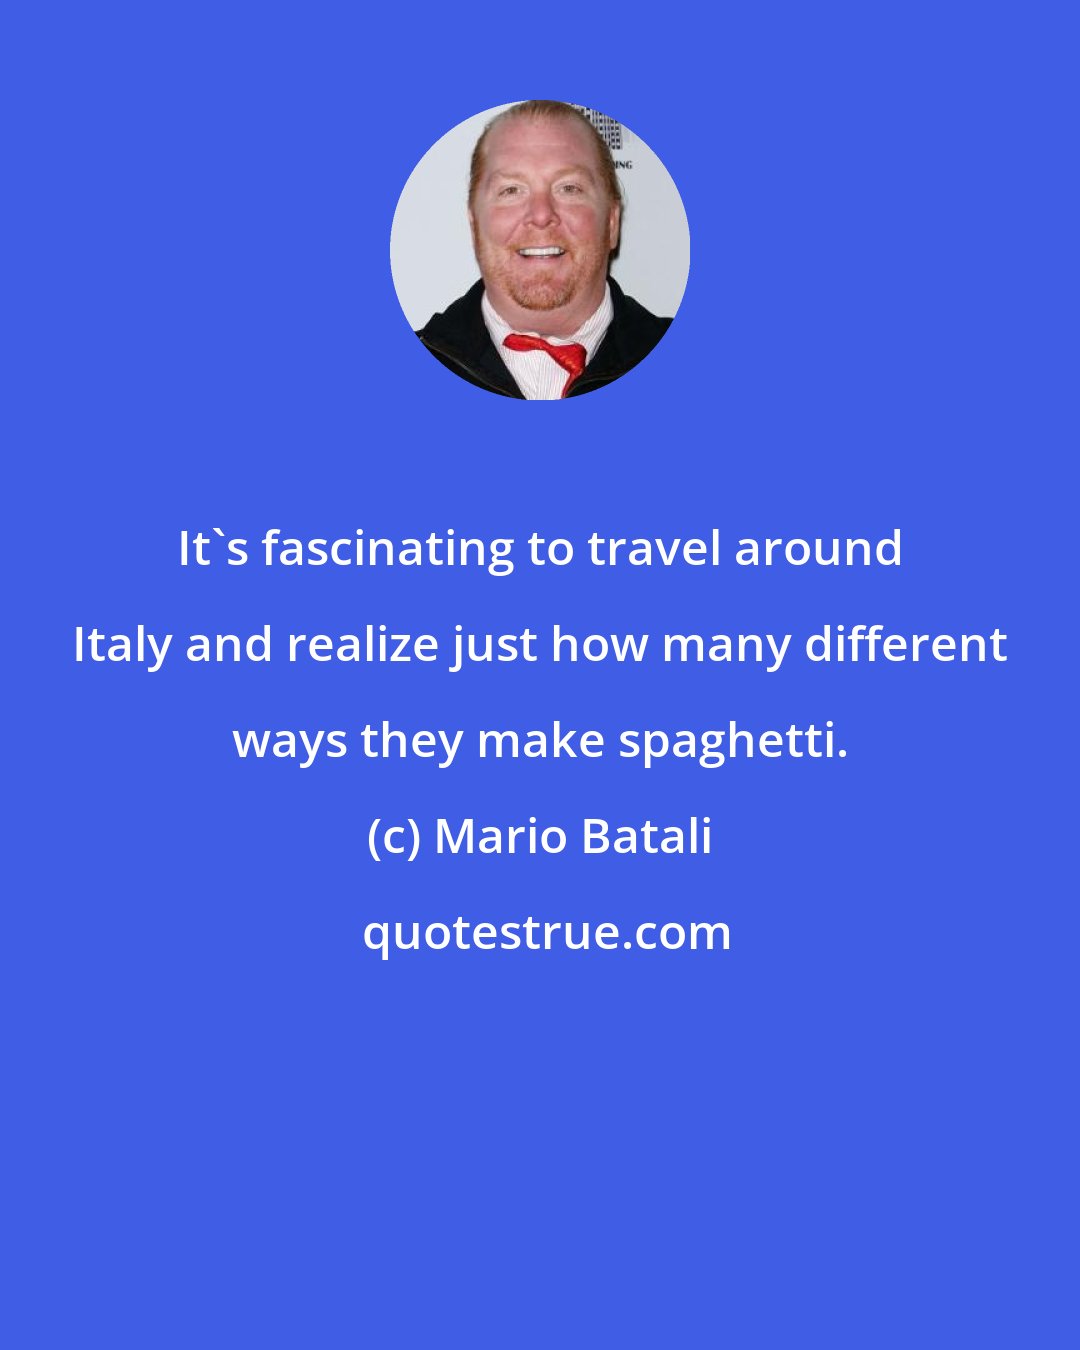 Mario Batali: It's fascinating to travel around Italy and realize just how many different ways they make spaghetti.